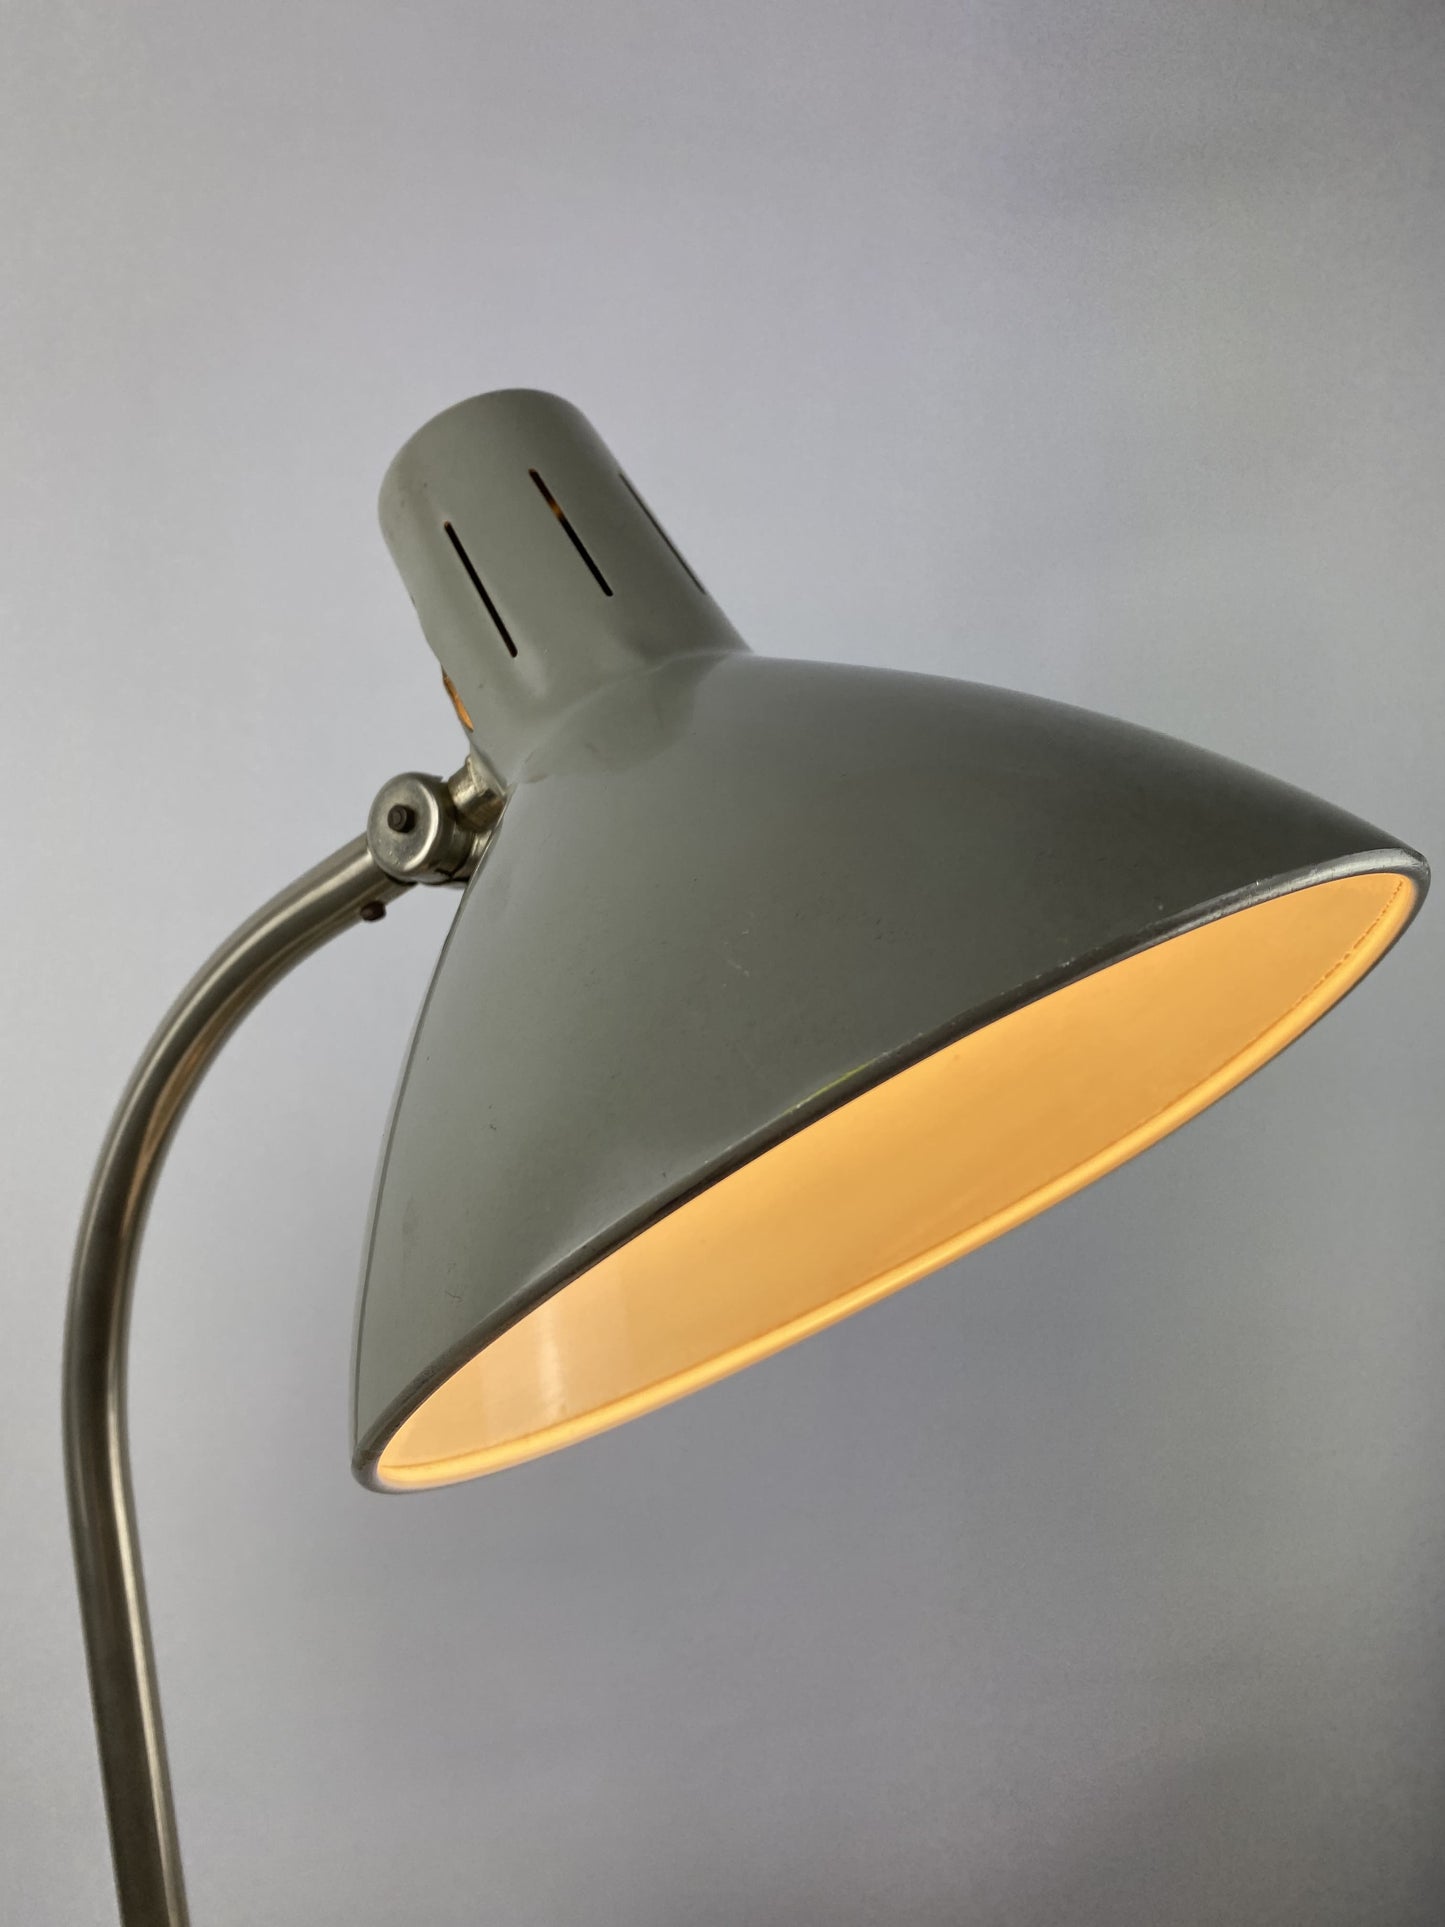 Grey desk light by H. Busquet for hala zeist from the 1960's